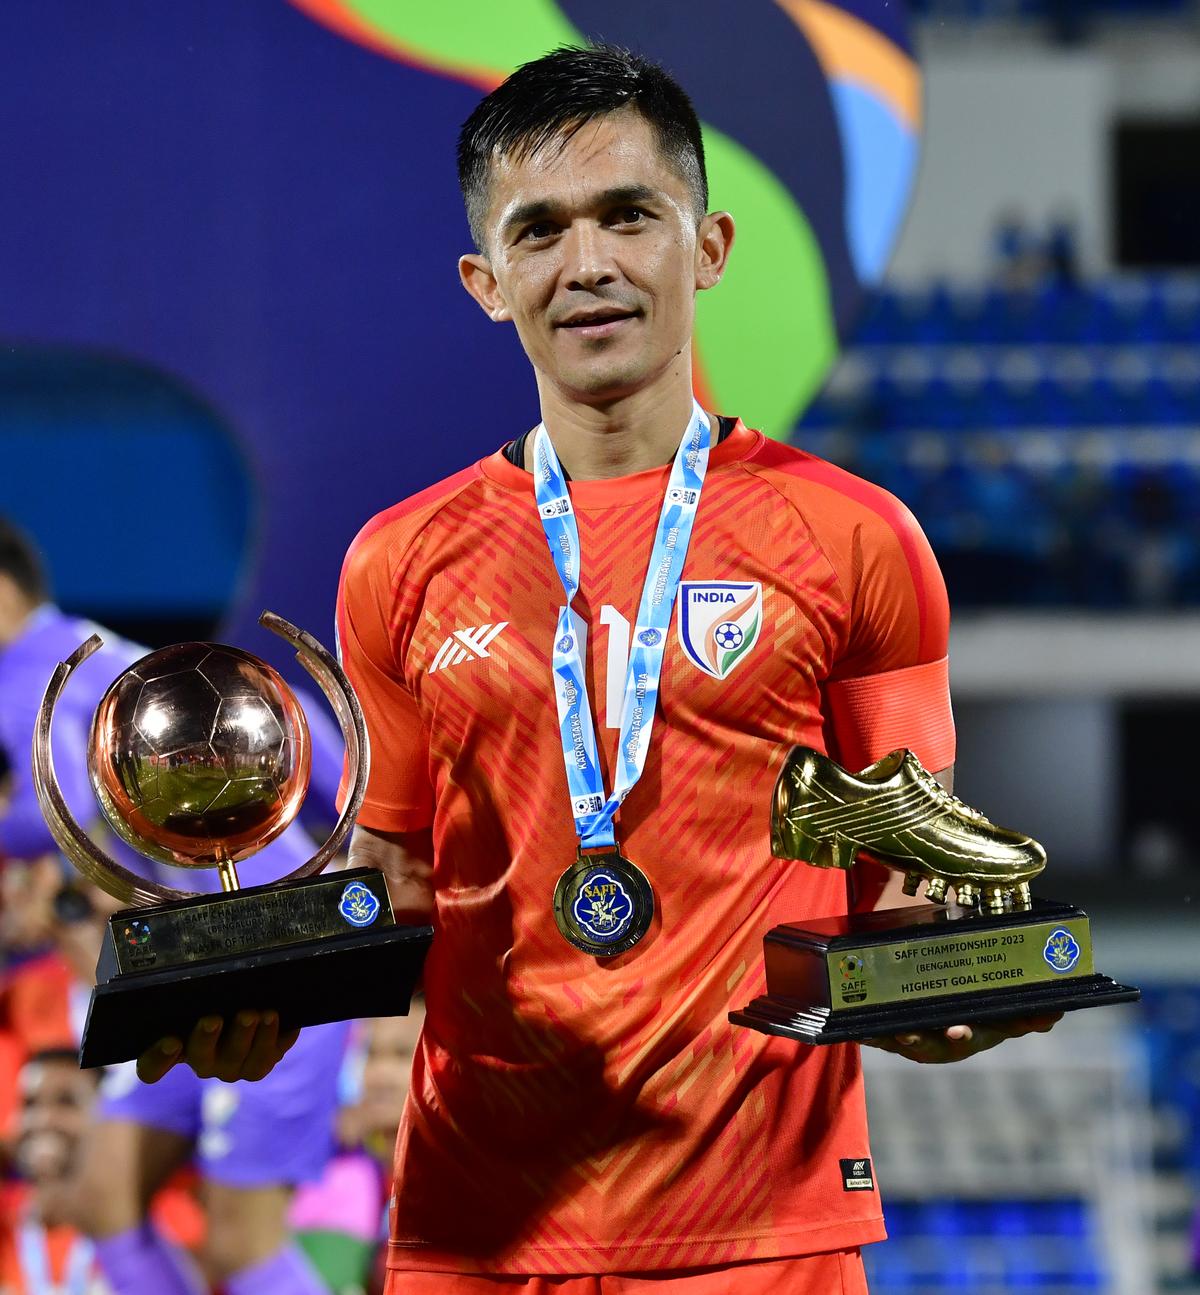 Sunil Chhetri holds the awards for best player and top goalscorer after India won the 2023 SAFF Championship beating Kuwait in the final, in Bengaluru on July 4, 2023.